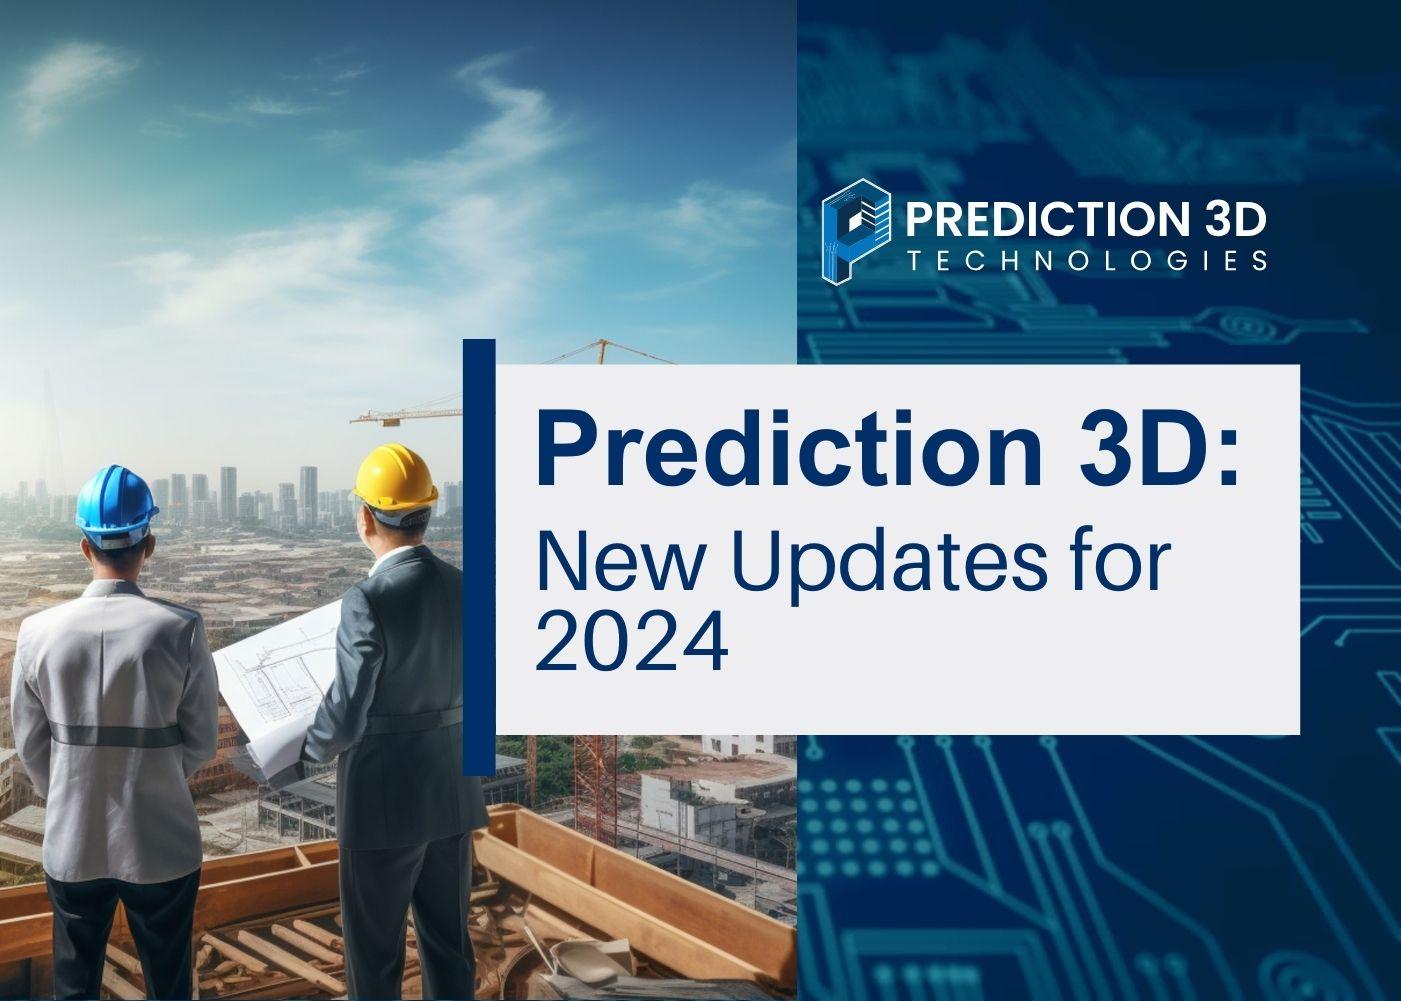 prediction 3d new updates for 2024